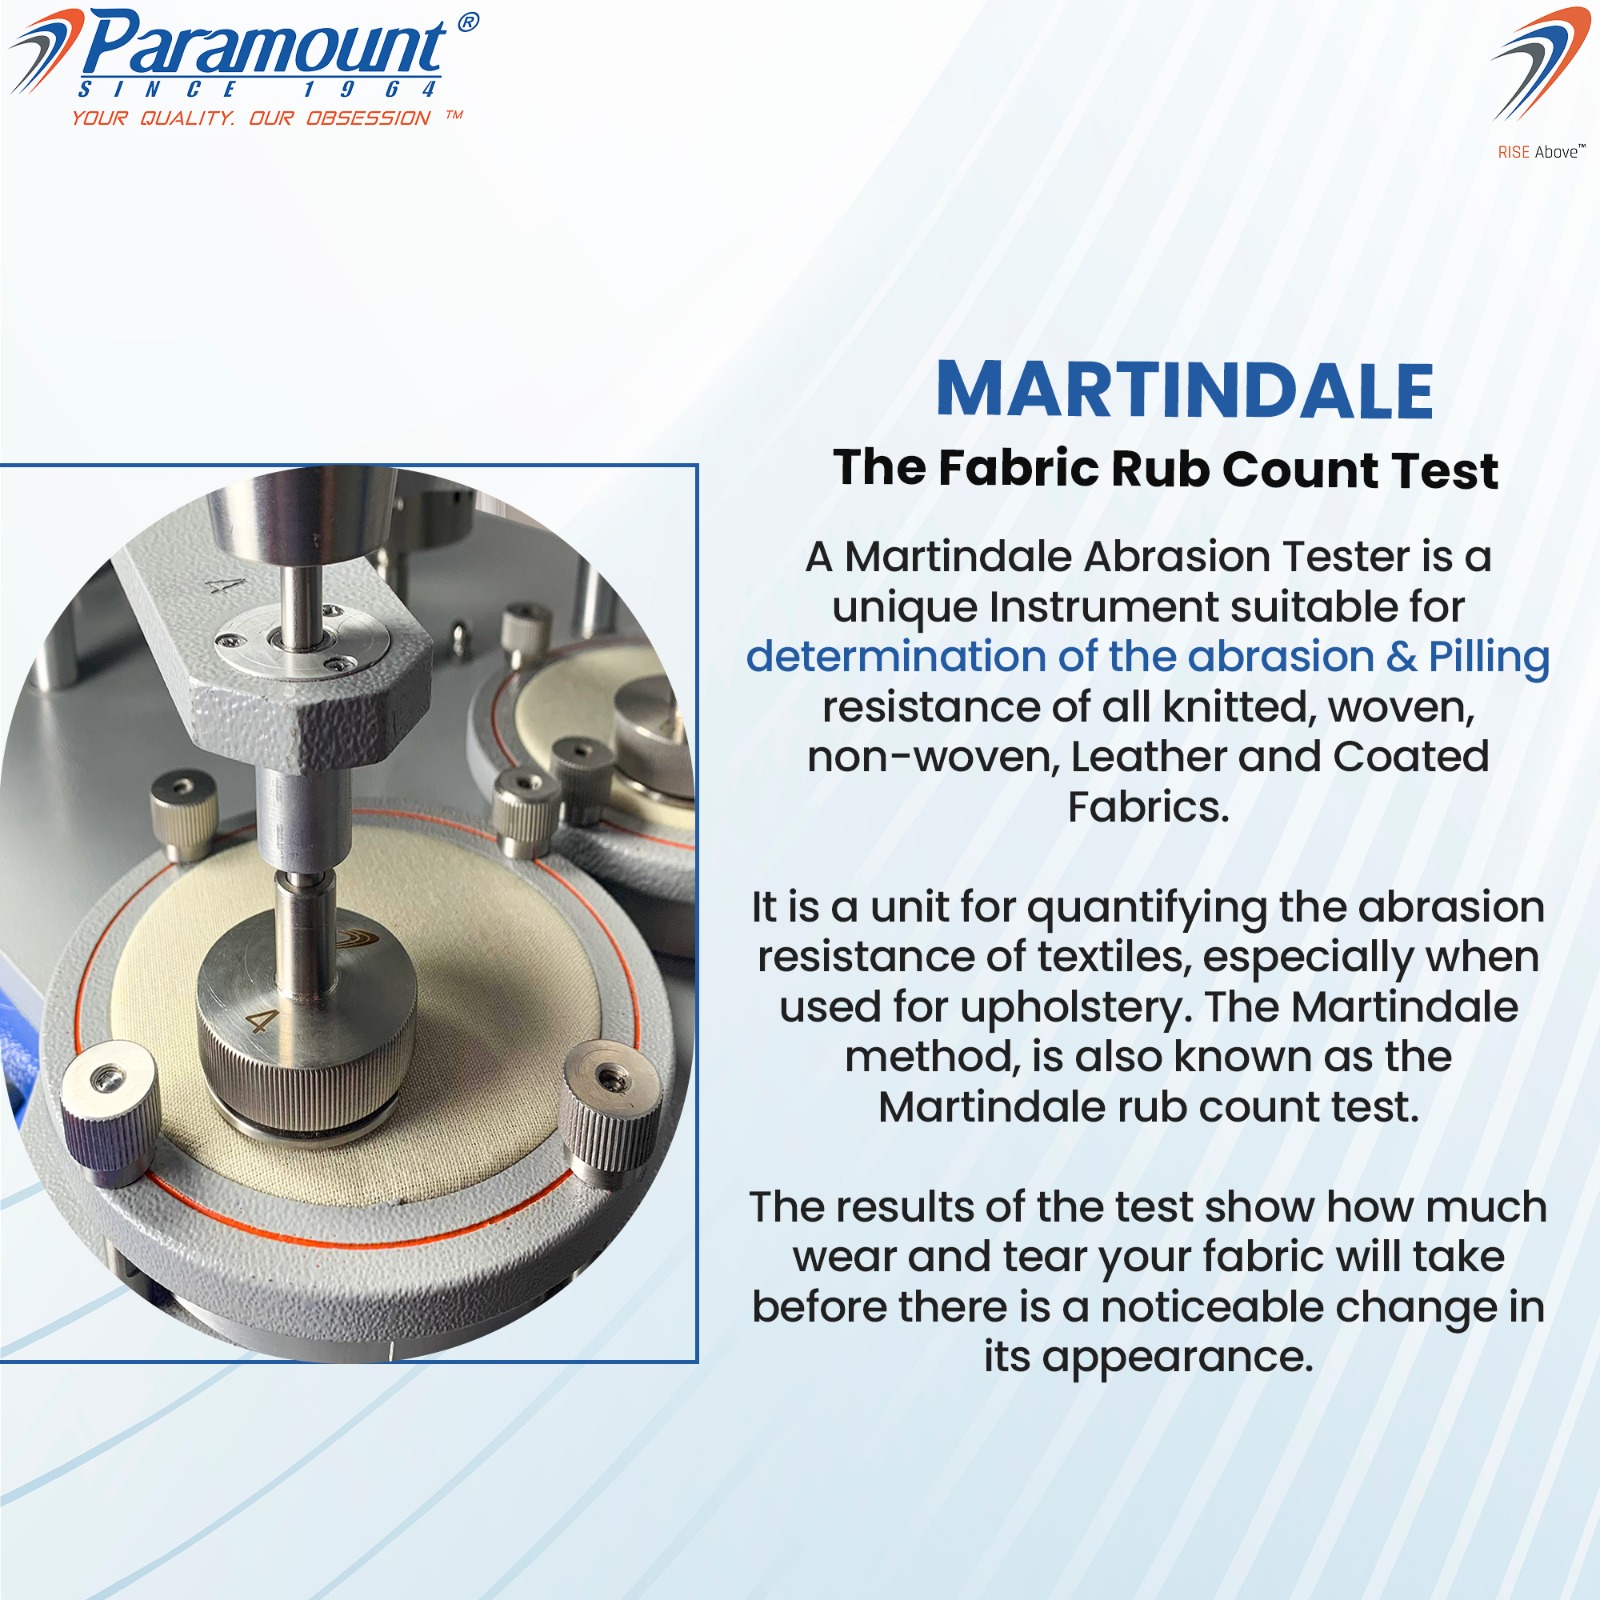 7 Paramount 7

IN CF

YOUR QUALITY. OUR OBSESSION ™

MARTINDALE

The Fabric Rub Count Test

A Martindale Abrasion Tester is a
unique Instrument suitable for
determination of the abrasion &amp; Pilling
resistance of all knitted, woven,
non-woven, Leather and Coated
Fabrics.

It is a unit for quantifying the abrasion
resistance of textiles, especially when
used for upholstery. The Martindale
method, is also known as the
Martindale rub count test.

The results of the test show how much
wear and tear your fabric will take
before there is a noticeable change in
its appearance.